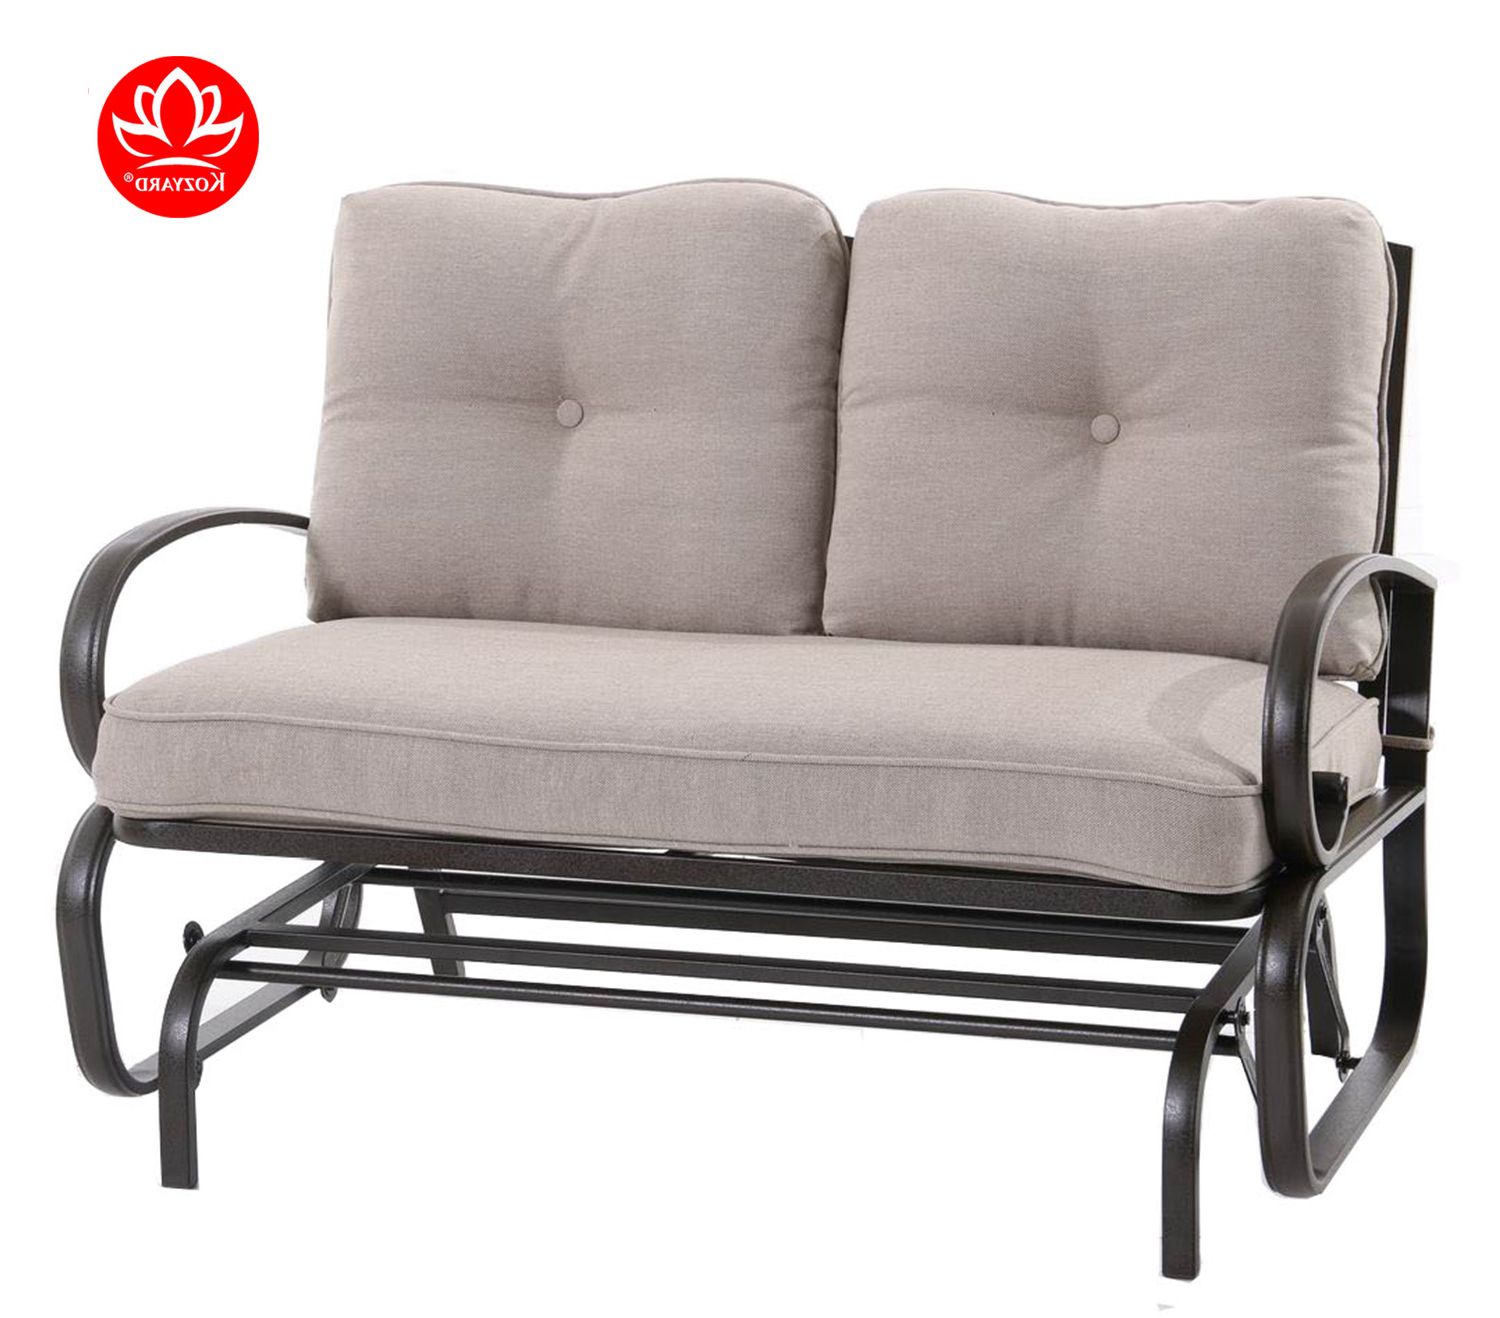 2 Person Loveseat Chair Patio Porch Swings With Rocker In Preferred Details About Kozyard Cozy Two Rocking Love Seats Glider Swing Bench /  Rocker For Patio, Yard (View 21 of 30)